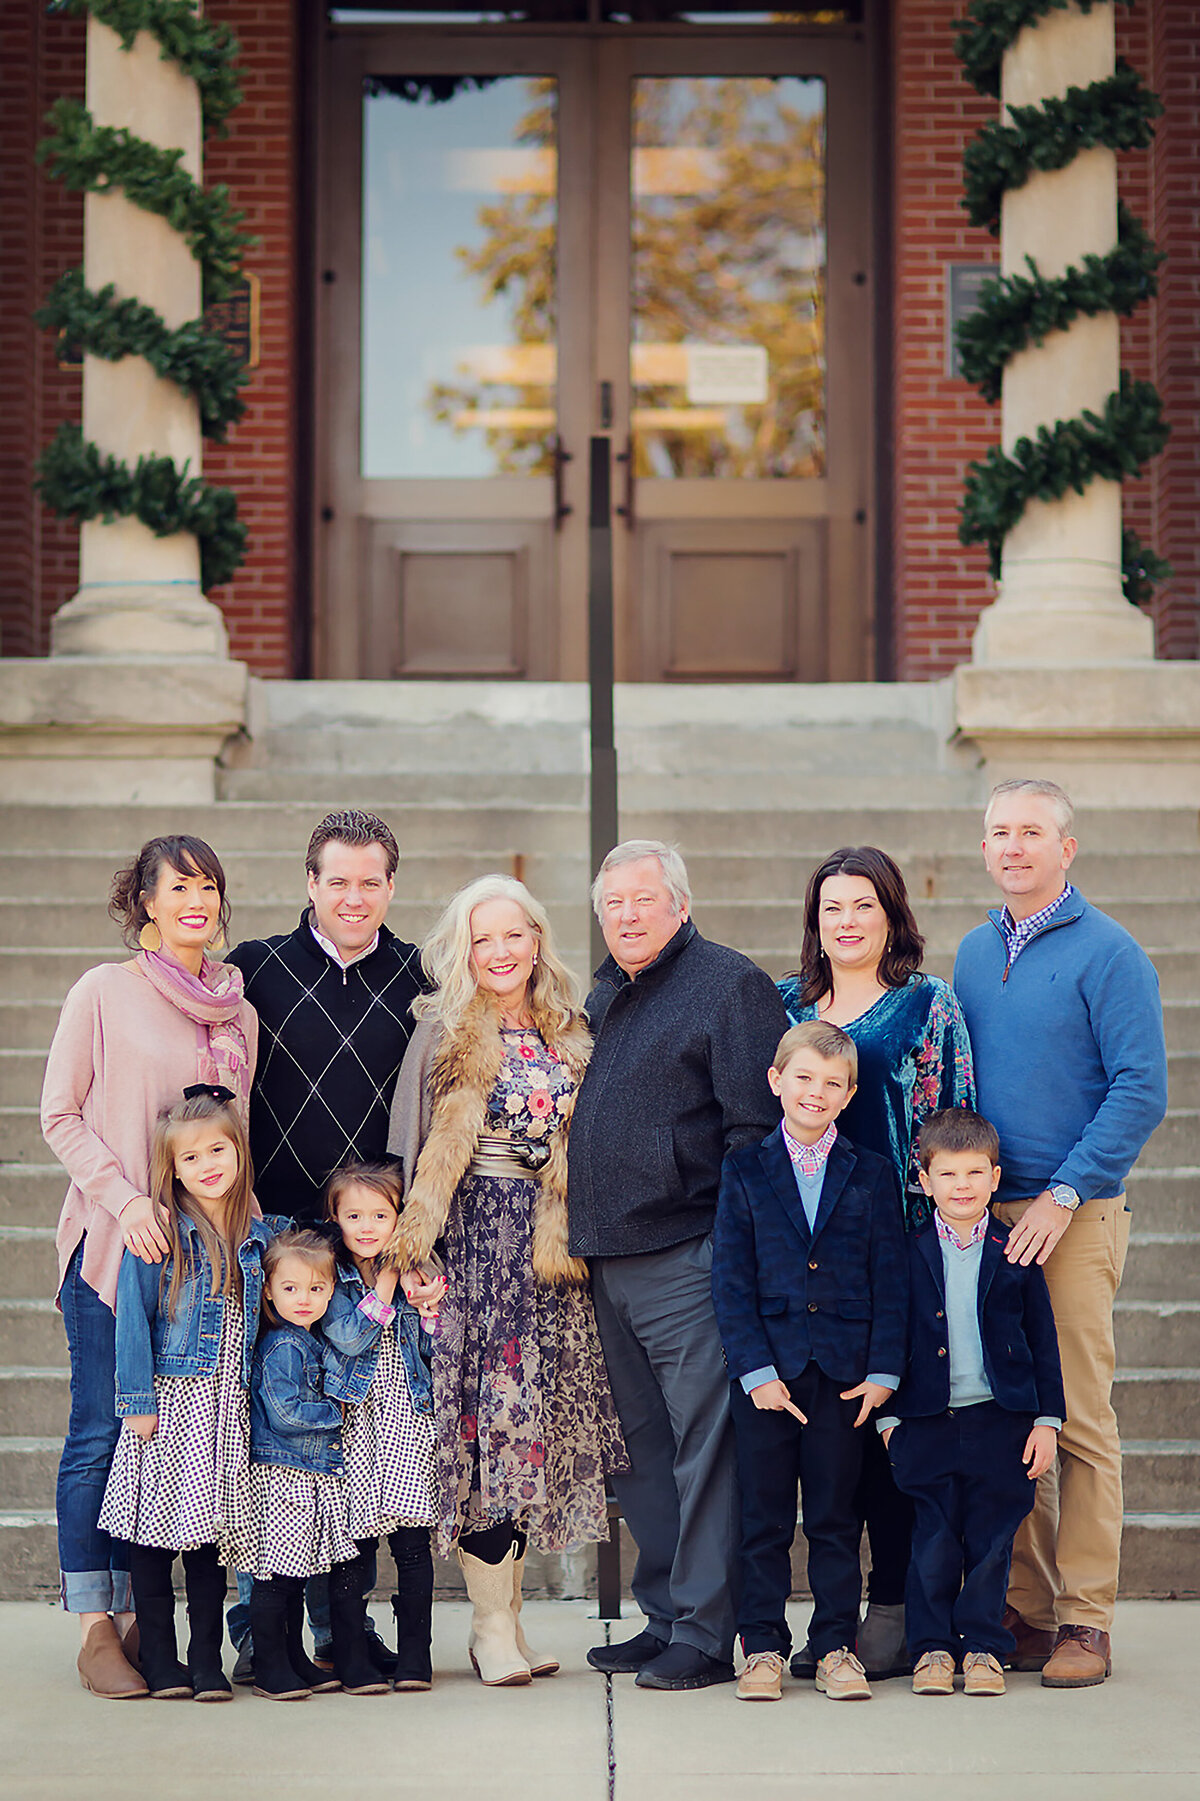 Group photograph of an extended family in downtown Franklin around Christmas time. They are dressed up in front of a building decorated with garland.